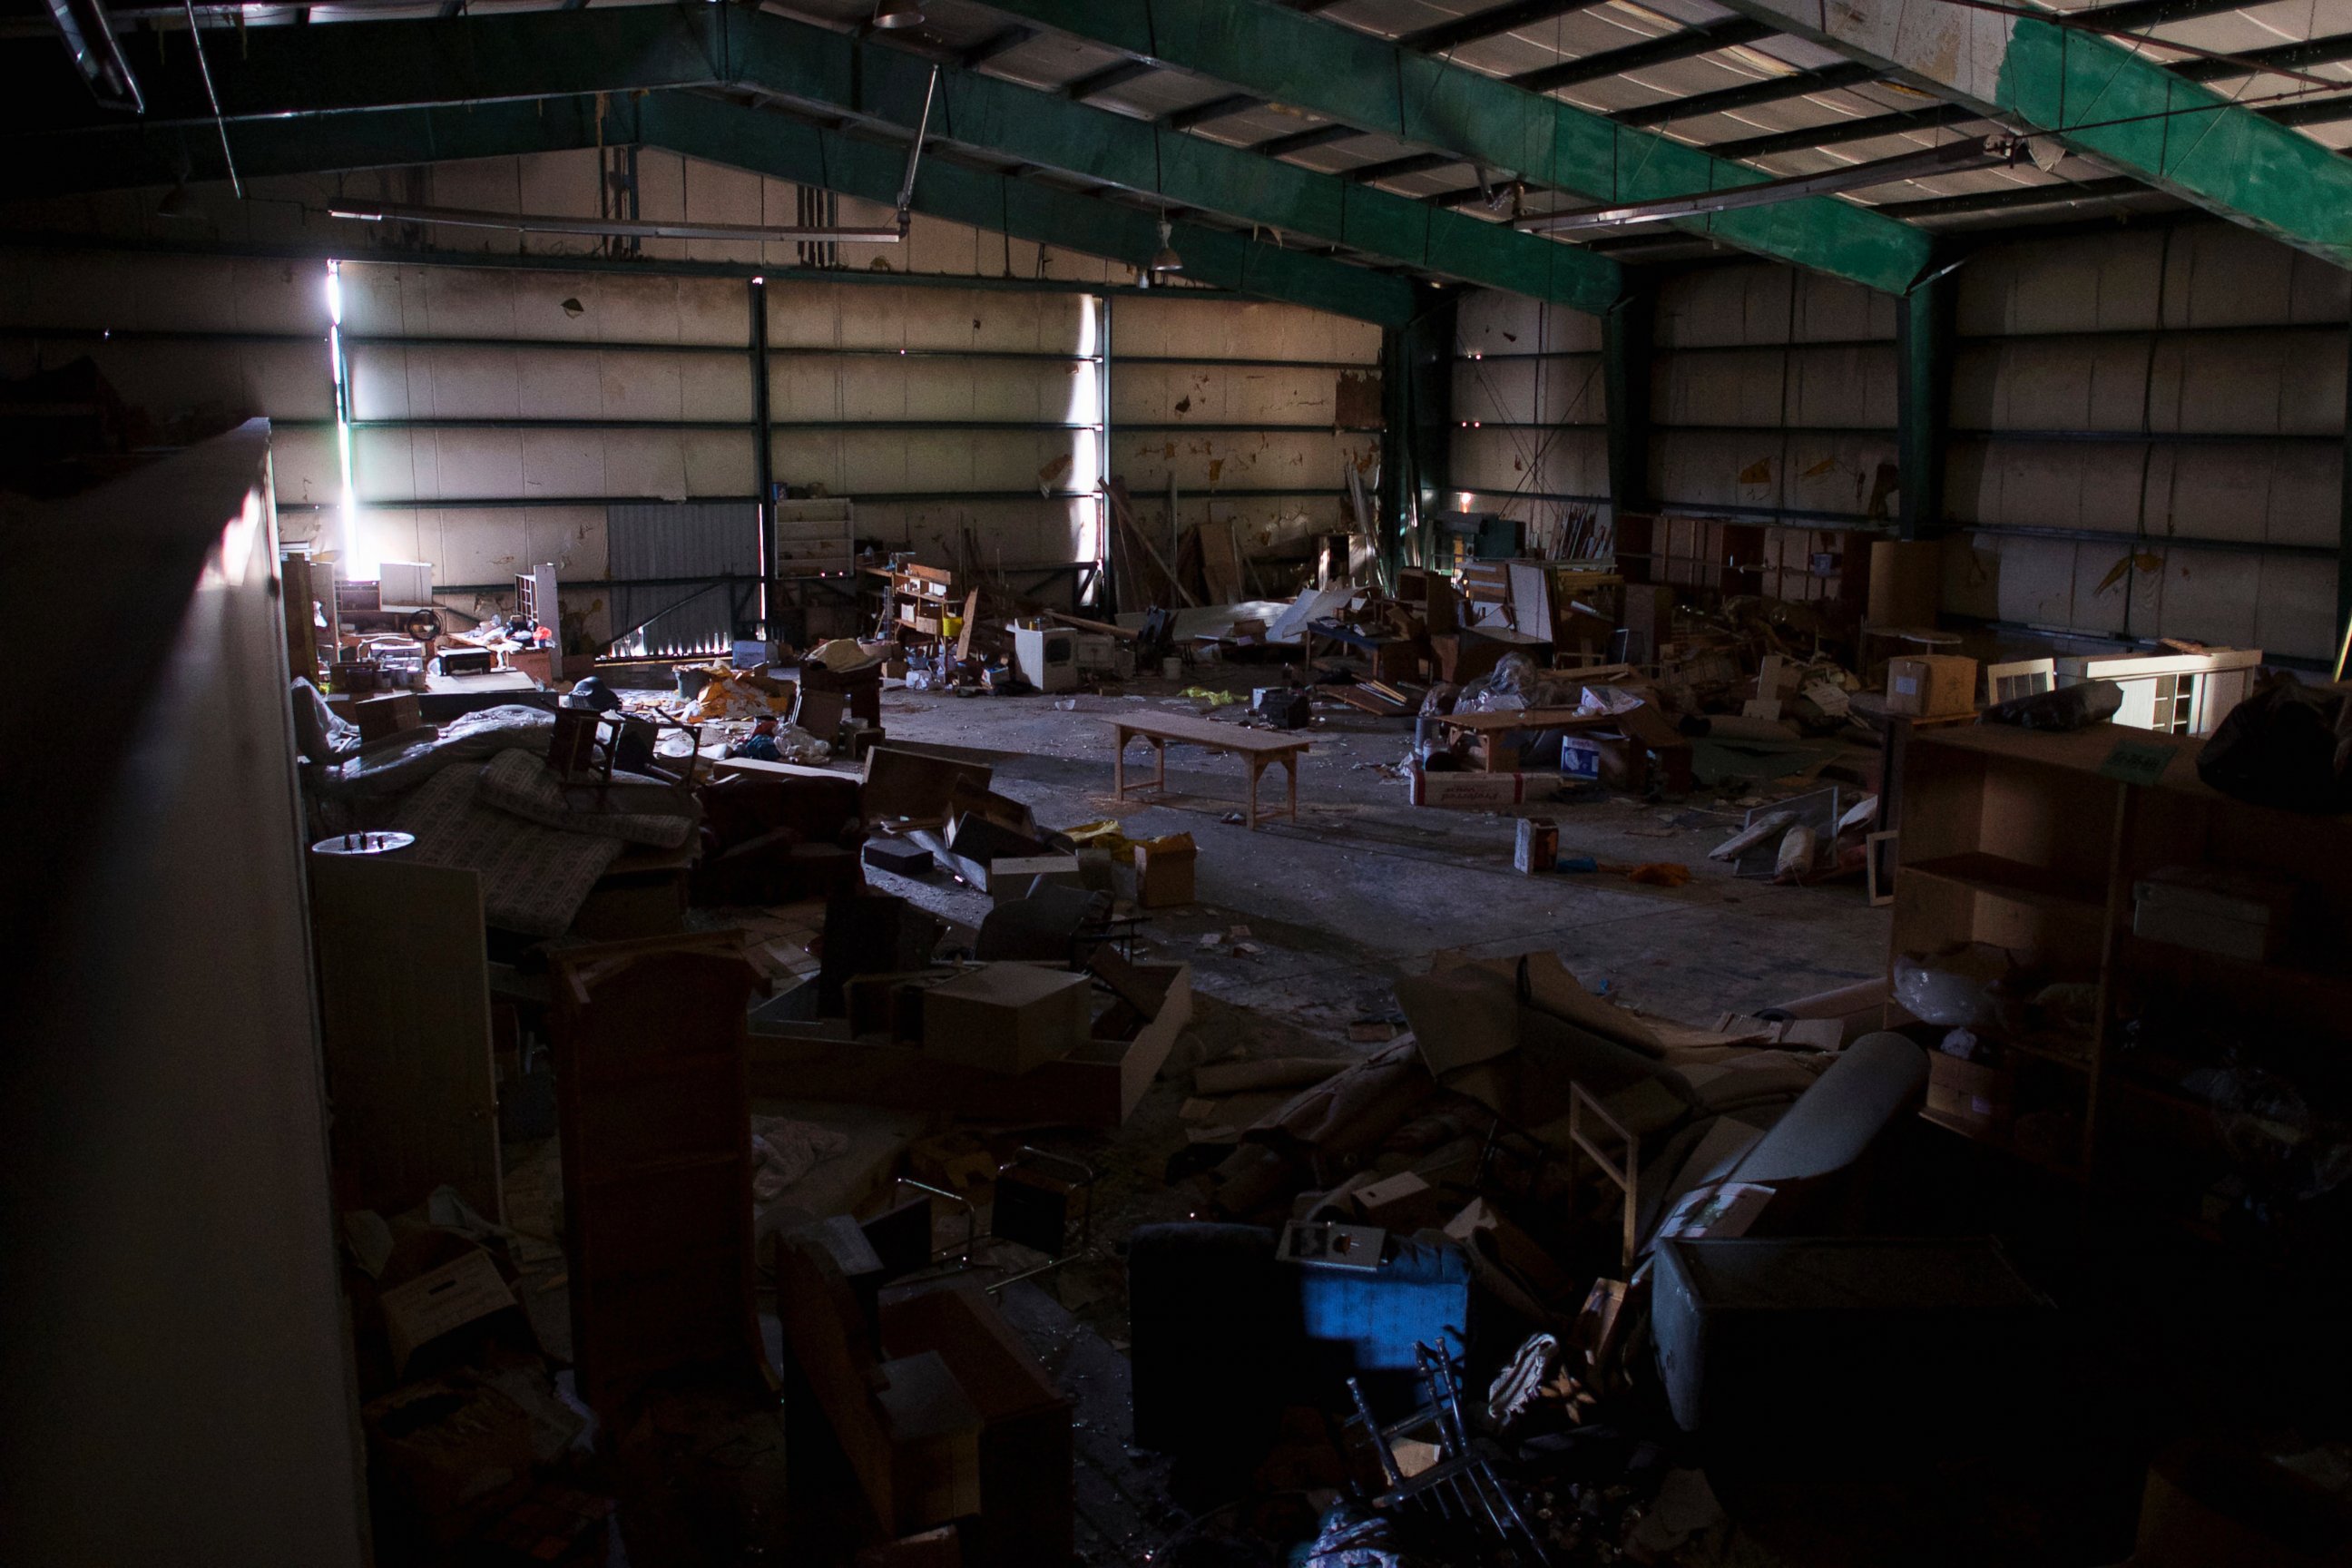 PHOTO: An interior view of the hangar within the abandoned Birchwood Resort, where Eric Frein was caught on Thursday, is seen in Tannersville, Pa., Oct. 31, 2014.